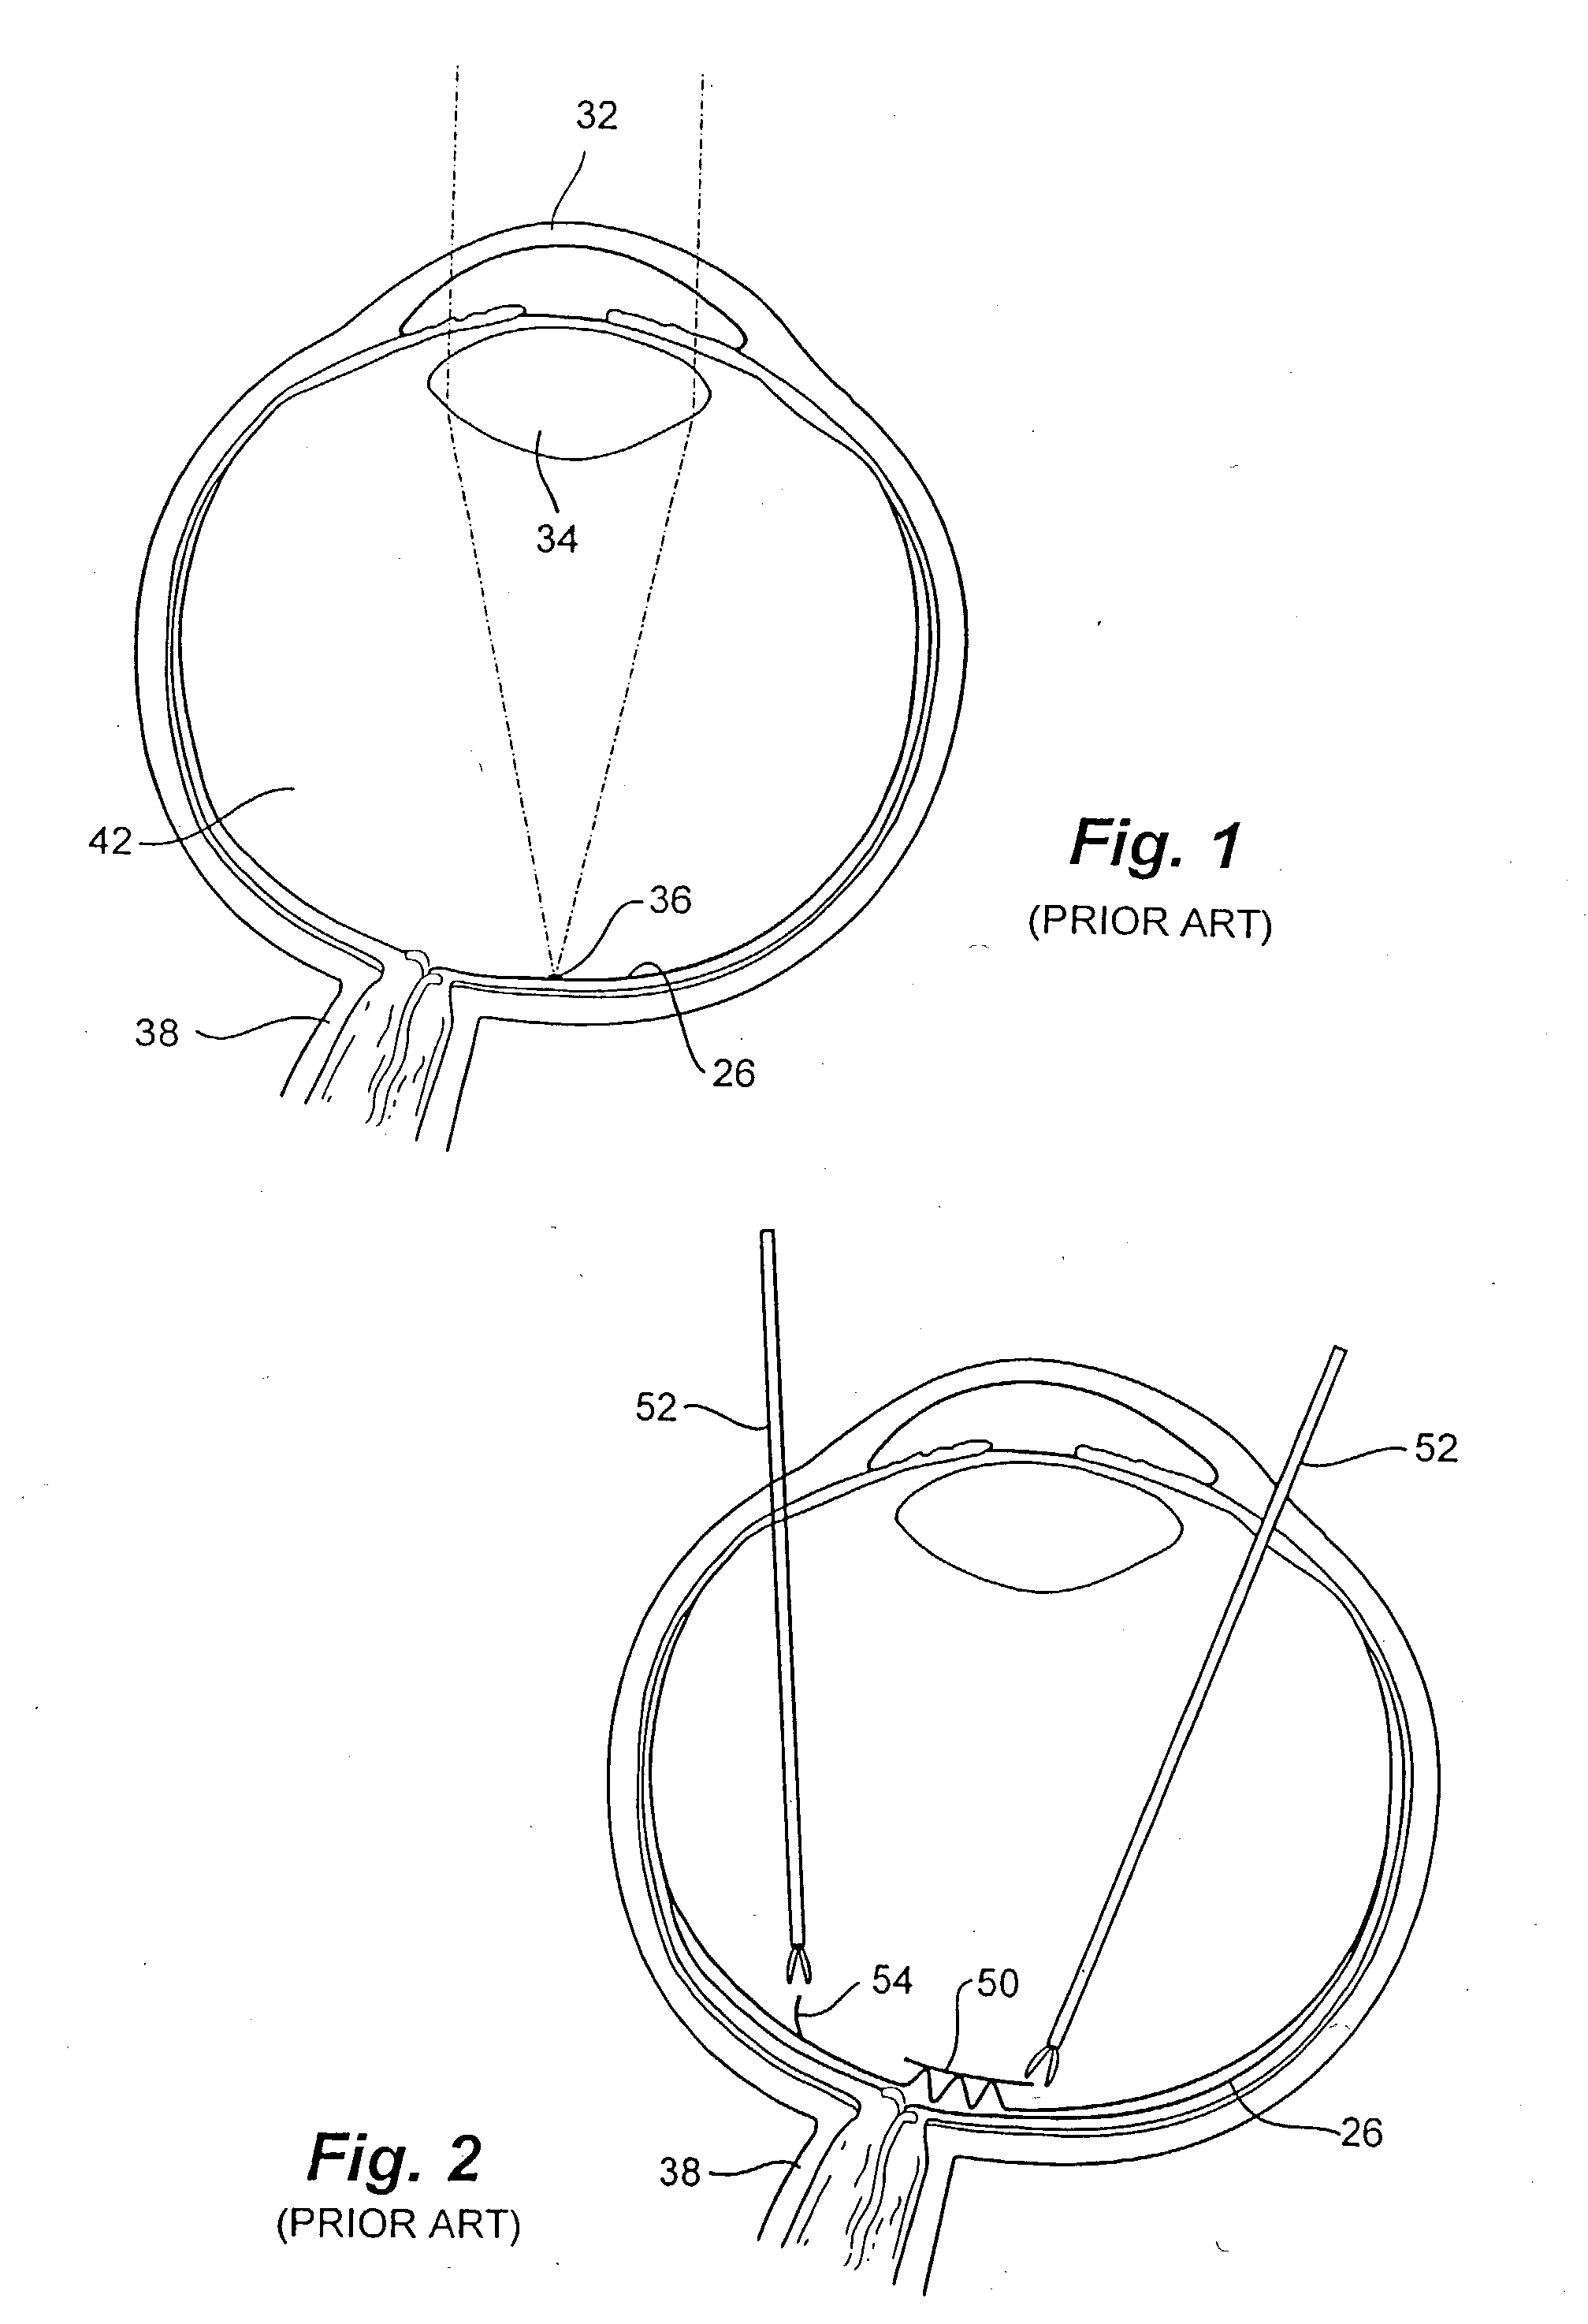 Apparatus for performing surgery inside the human retina using fluidic internal limiting membrane (ILM) separation (FILMS)